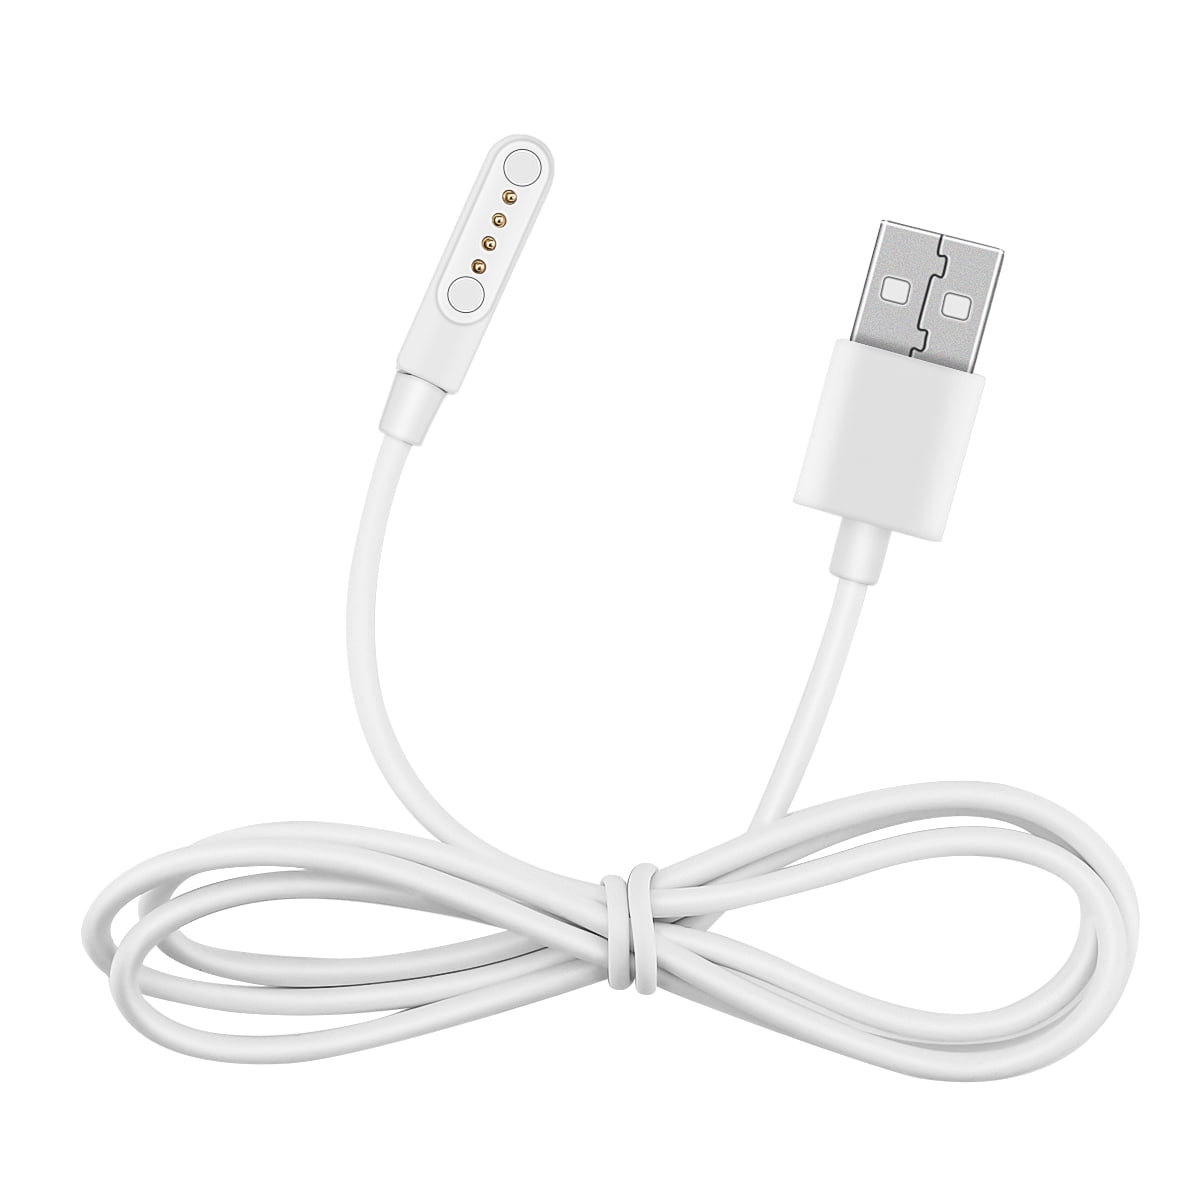 Charger Cable Cord USB Male to 4 Pin Pogo Power Charger Cable for Smart Watch, White - Walmart.com